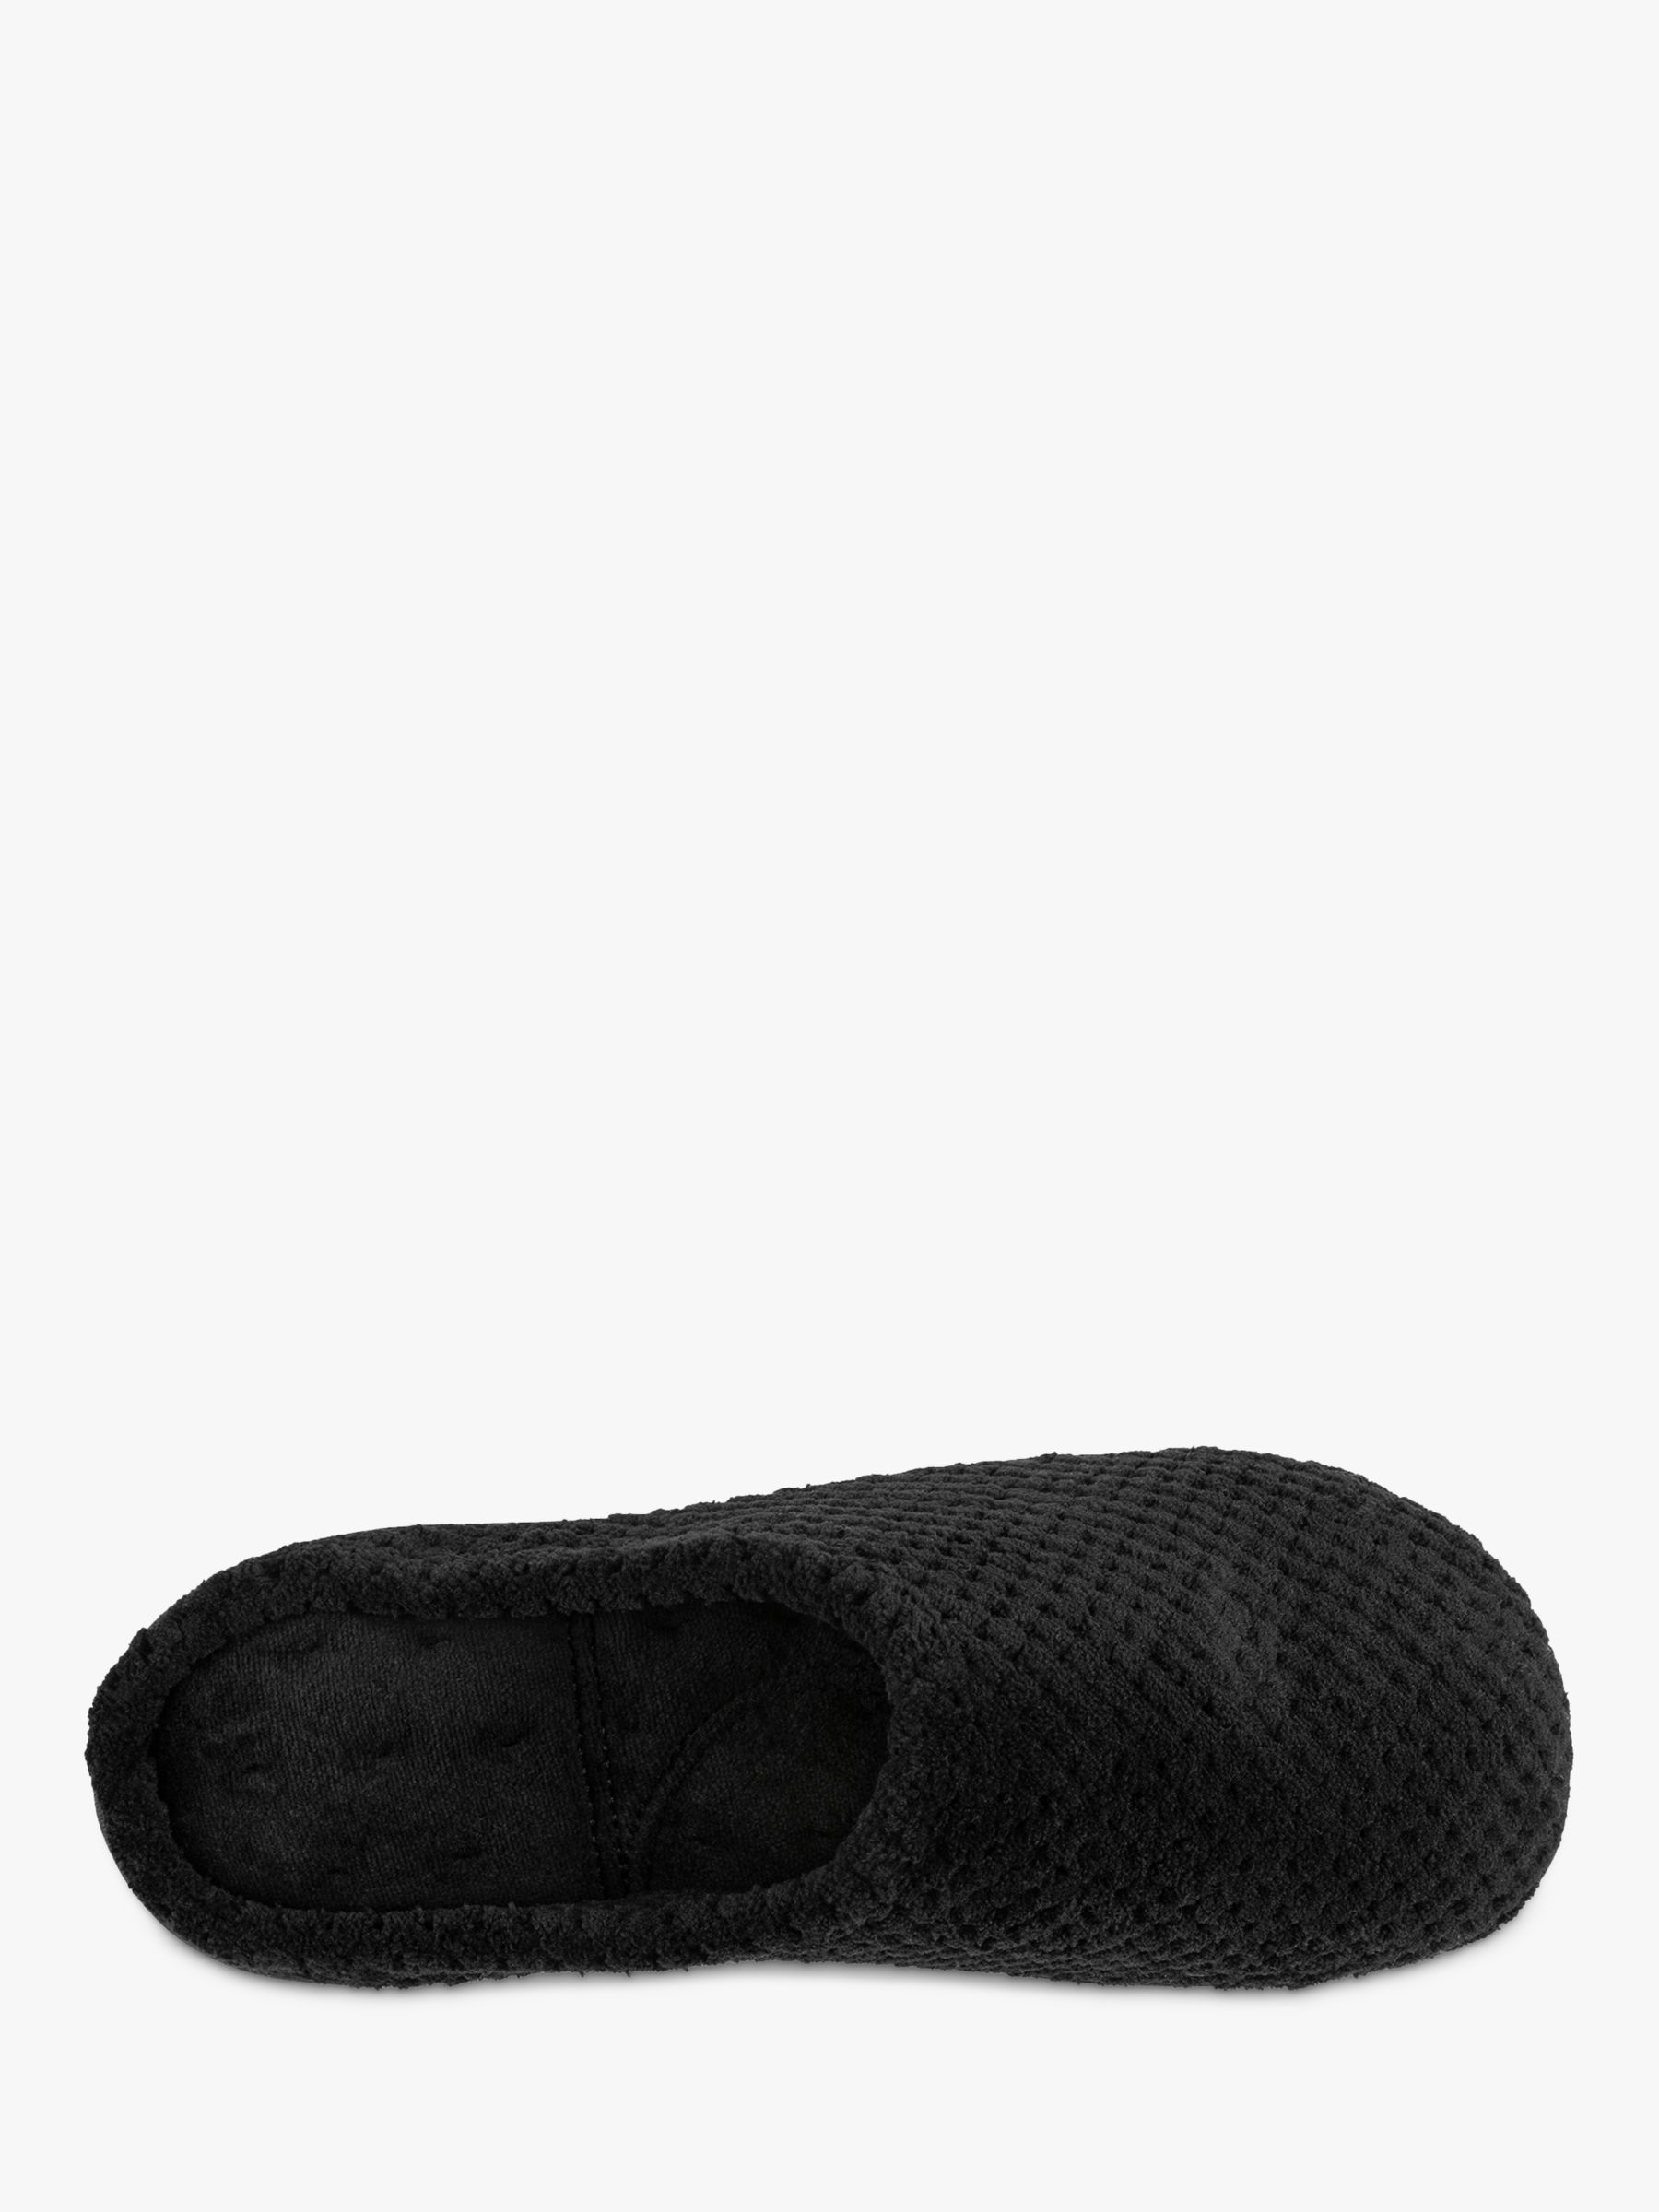 totes Popcorn Terry Mule Slippers, Black, 4